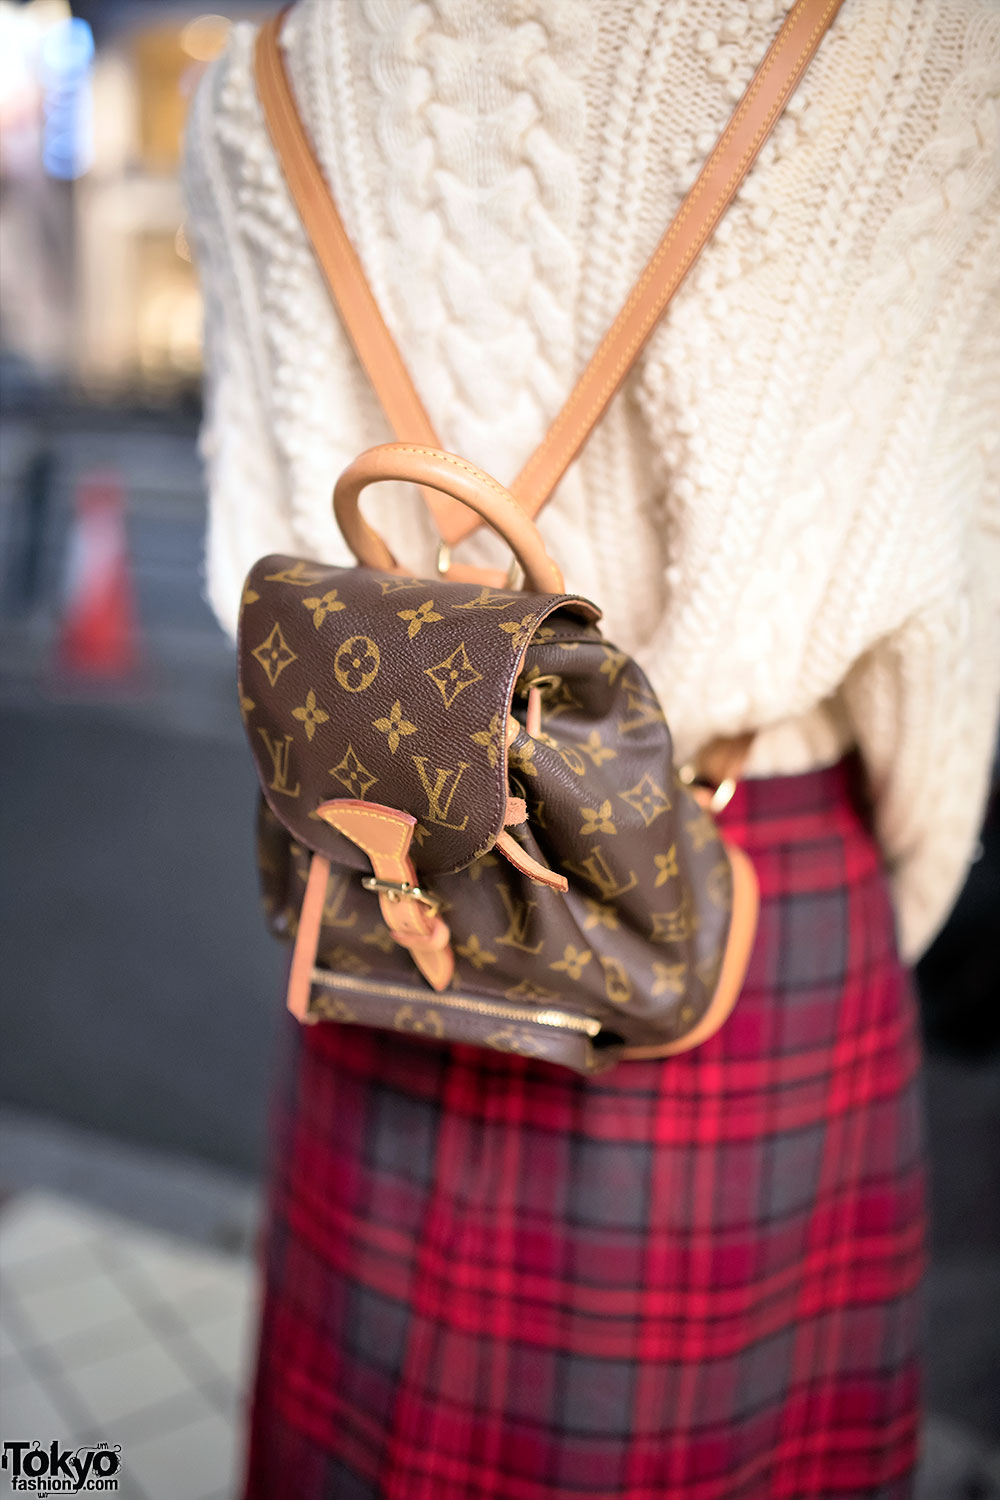 lv small leather bag